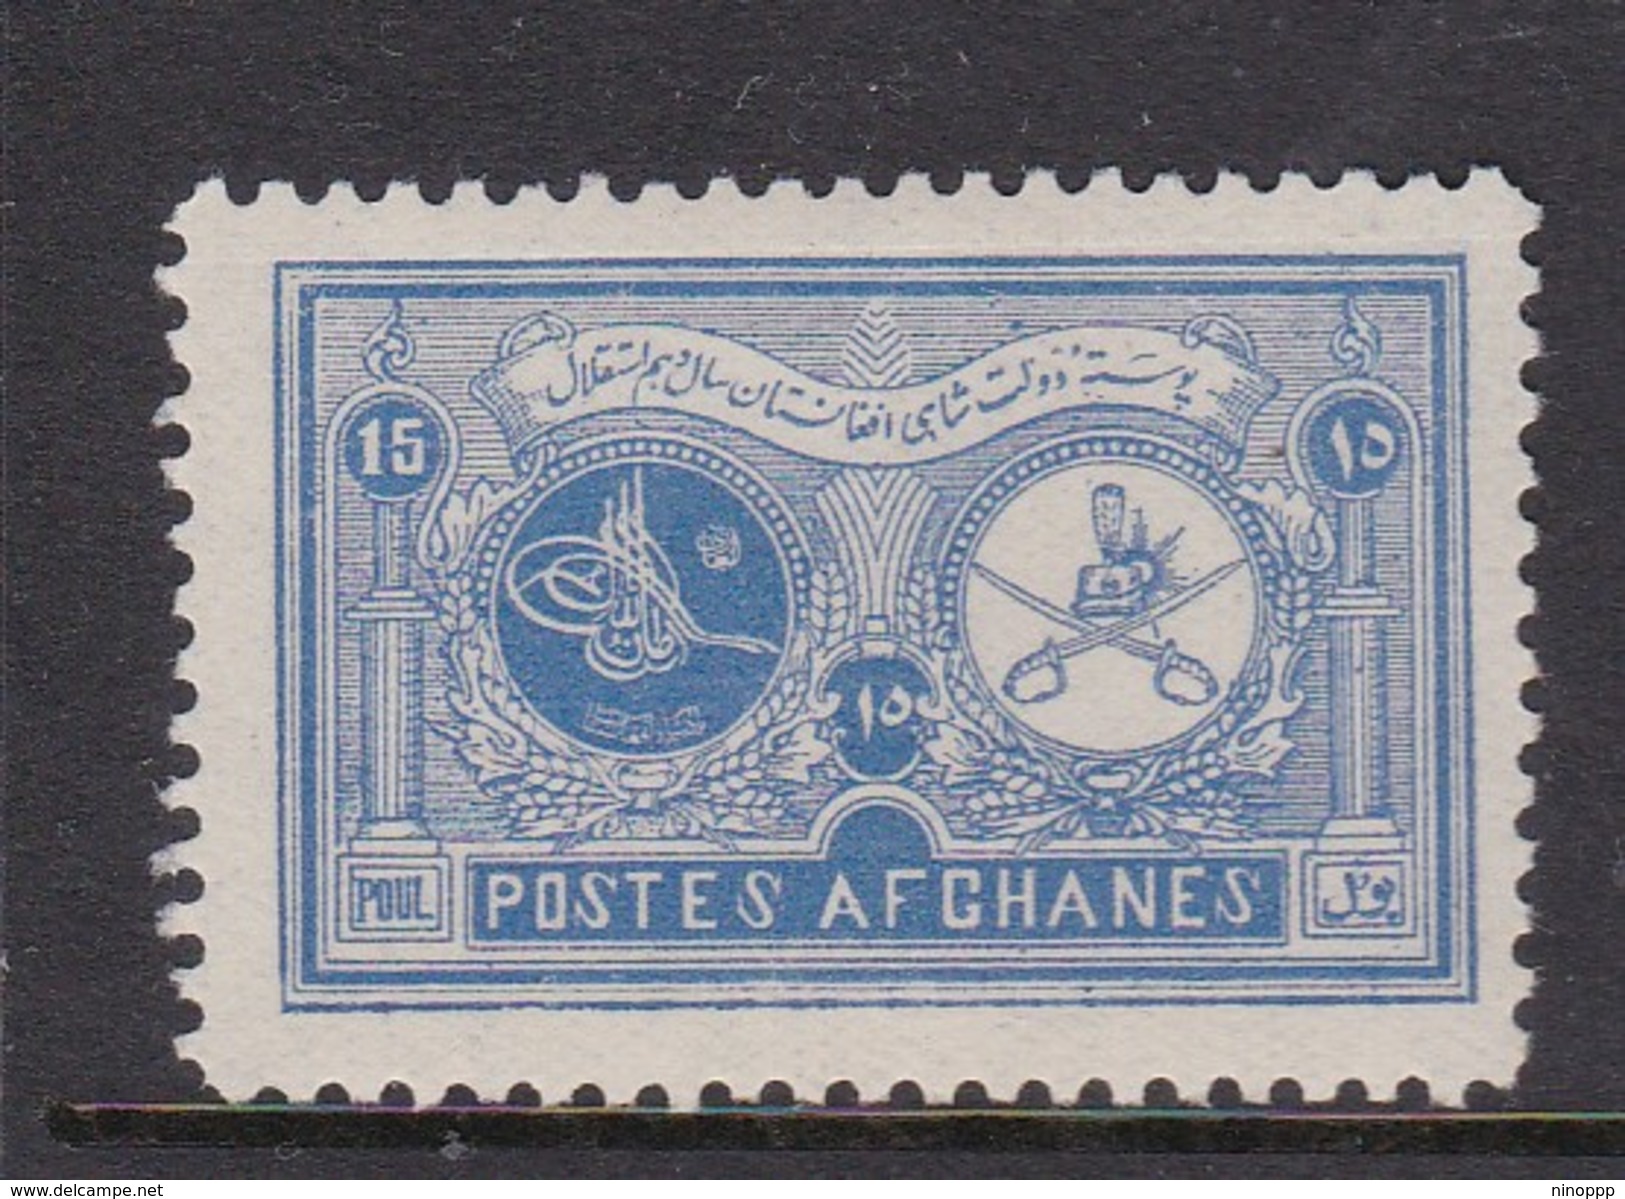 Afghanistan SG 191 1928 9th Anniversary Of Independence 15p Blue MNH - Afghanistan